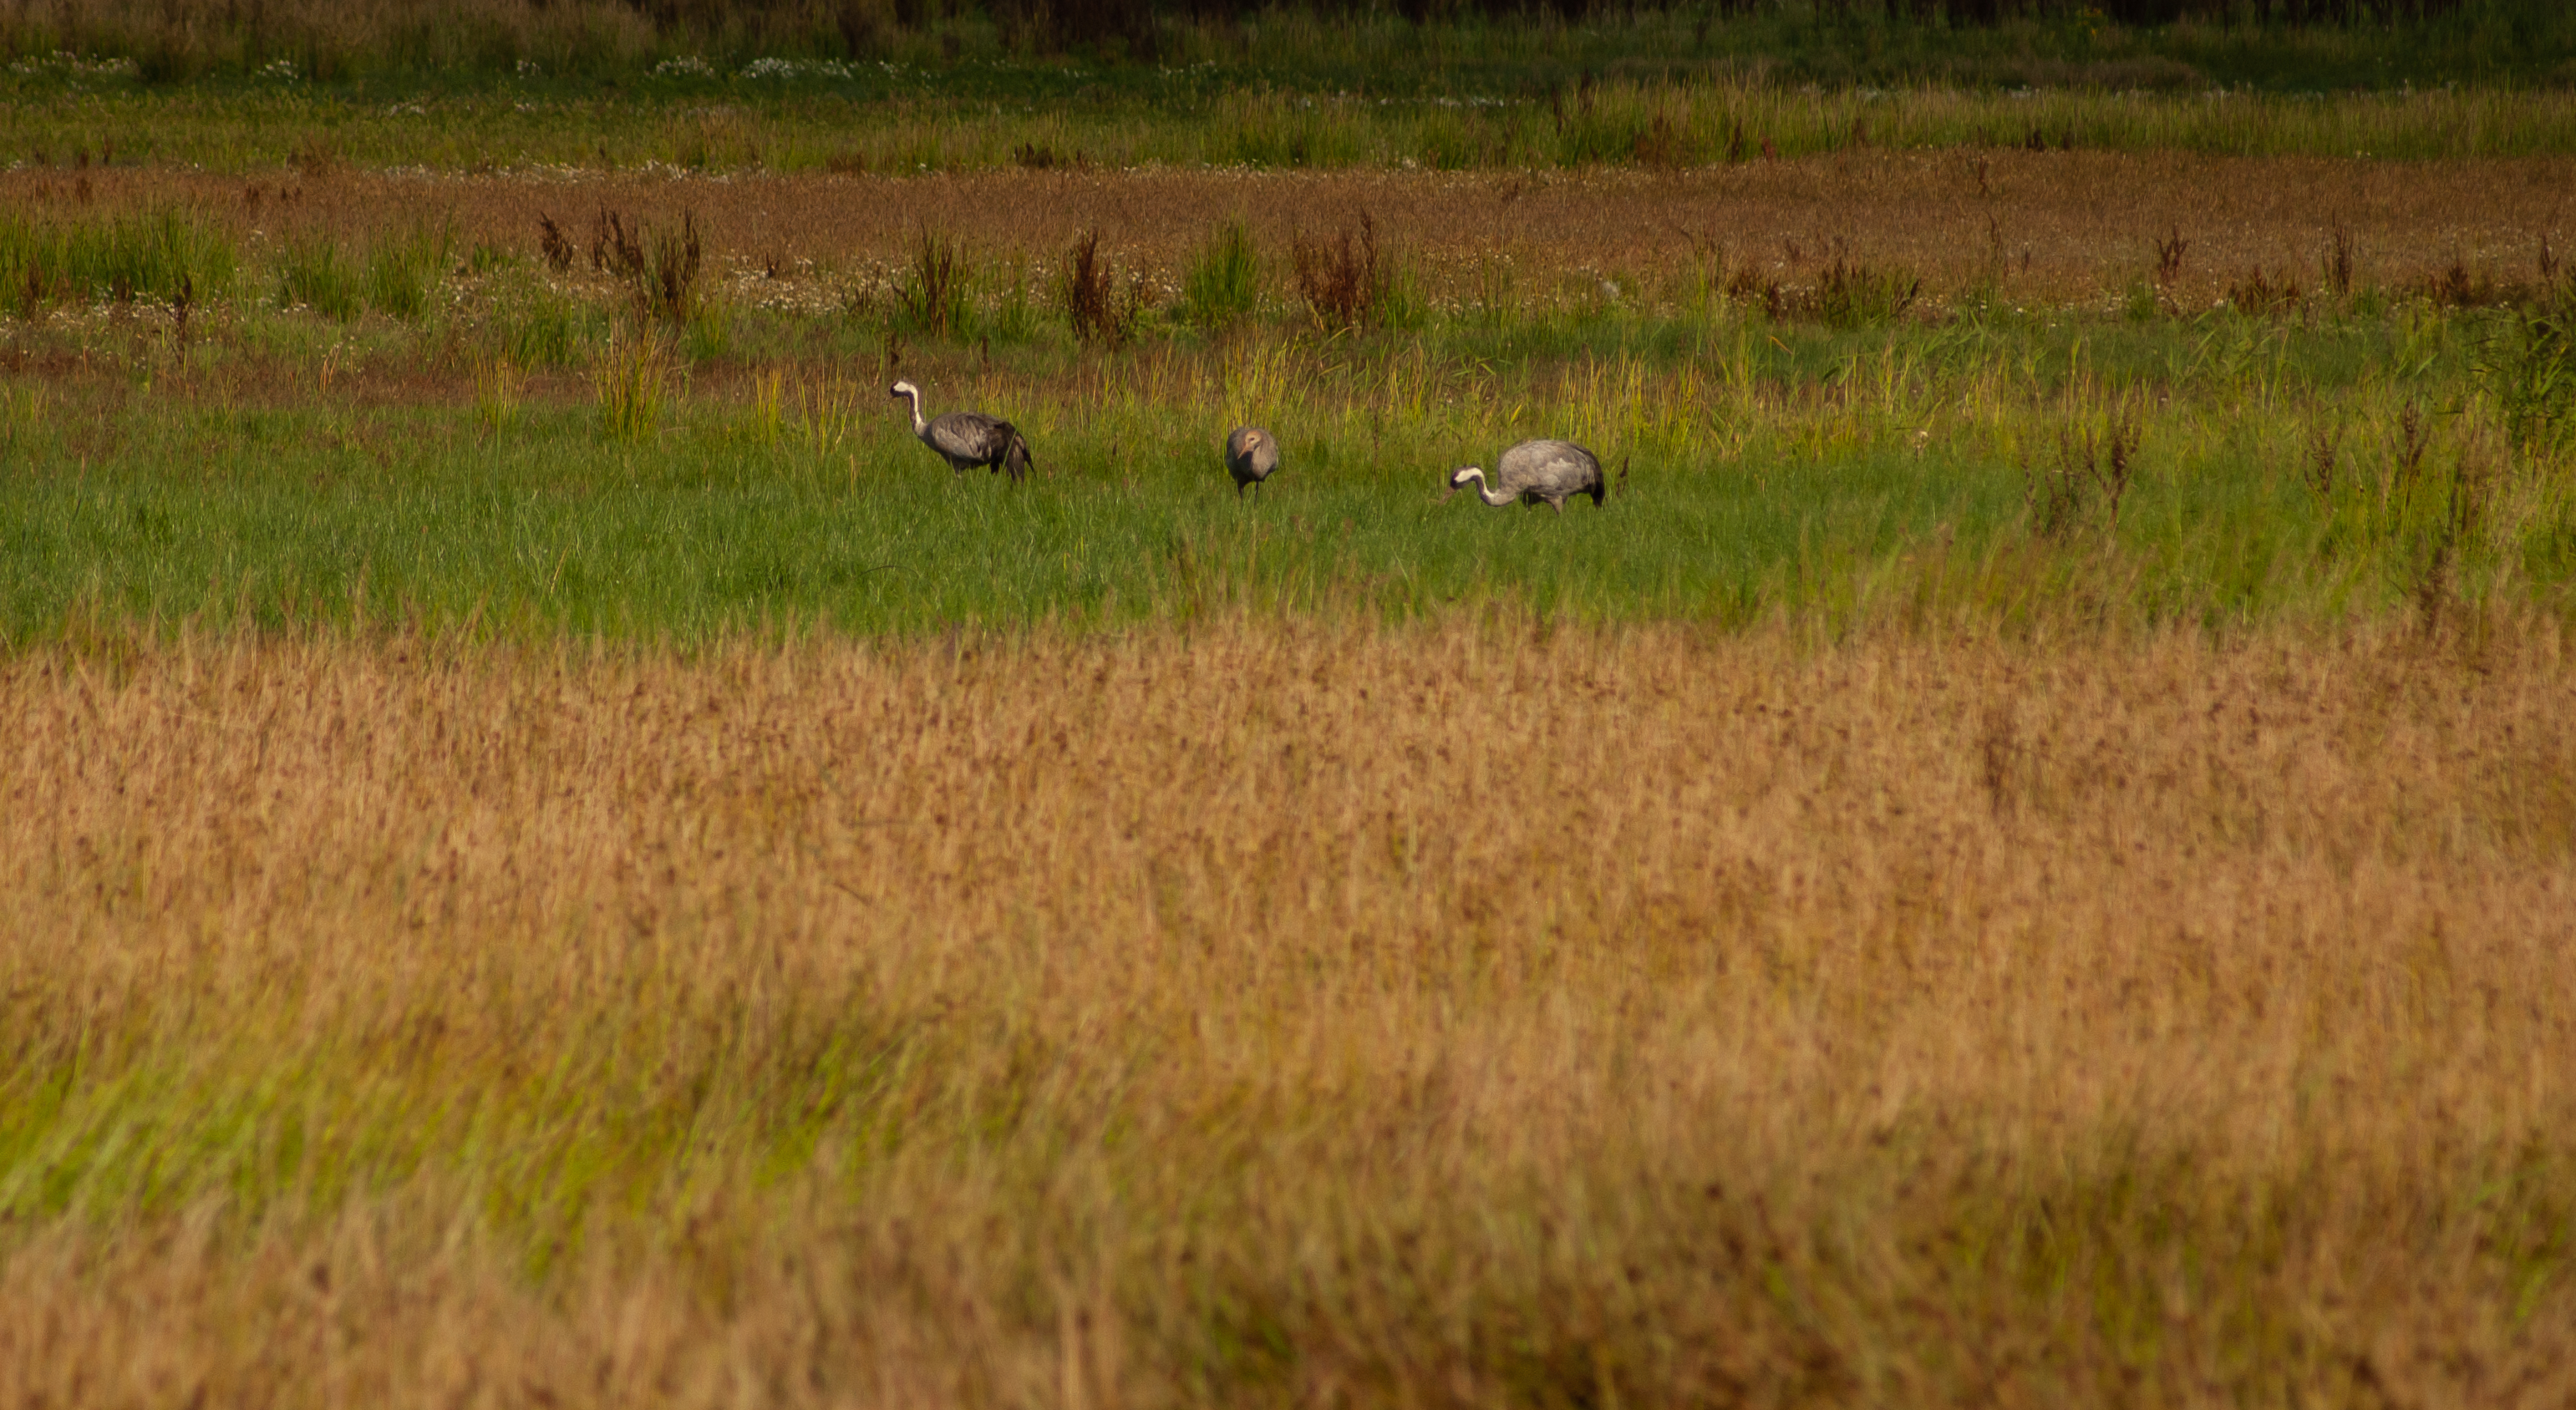 New fenland habitat could provide a home for cranes which have recolonised a nearby reserve (John Oliver)